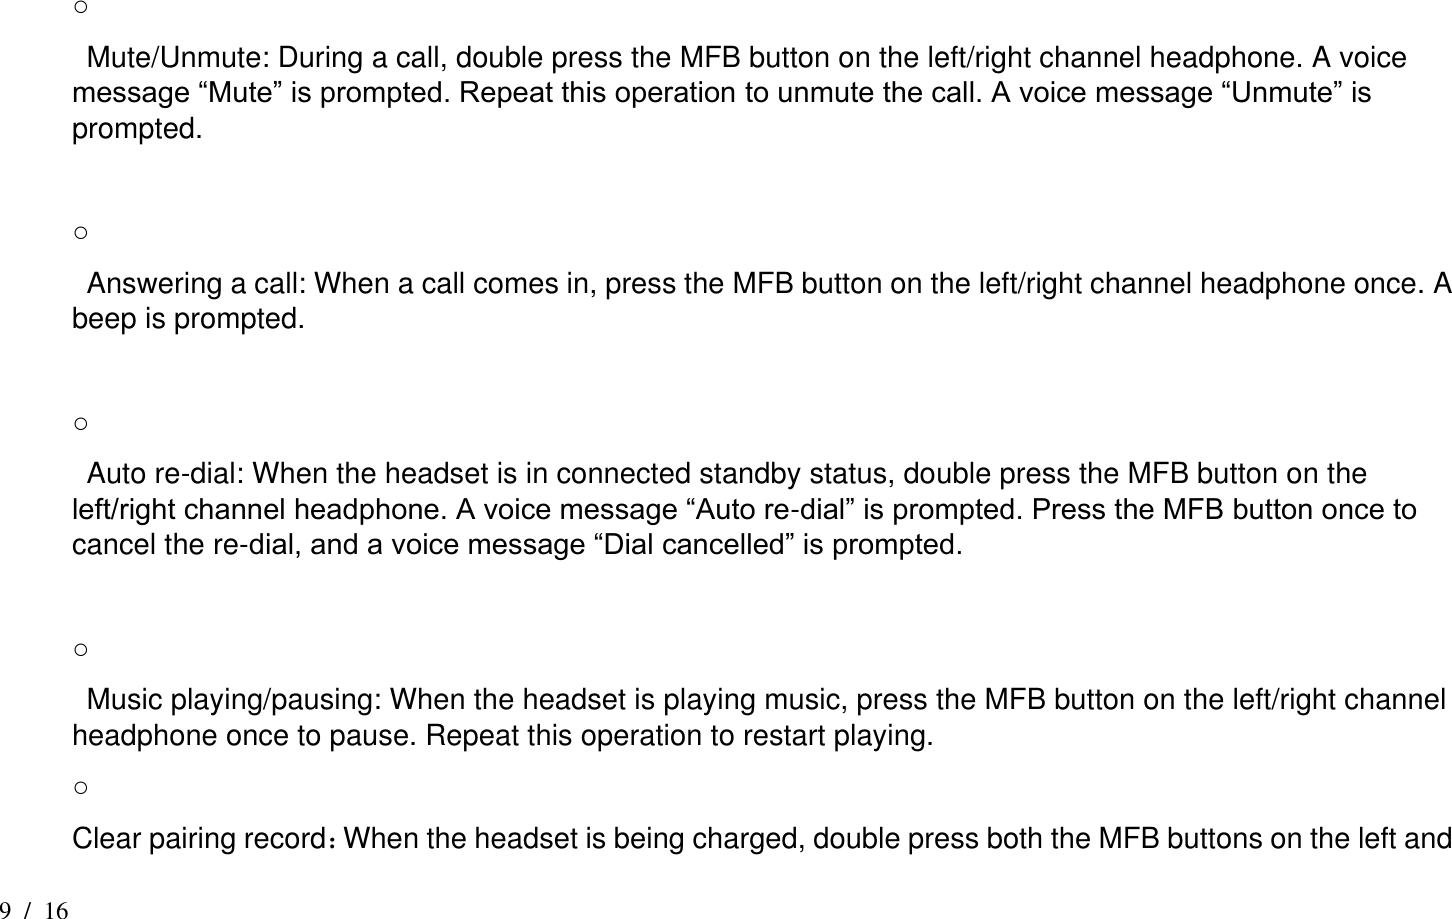 9  /  16  ○   Mute/Unmute: During a call, double press the MFB button on the left/right channel headphone. A voice message “Mute” is prompted. Repeat this operation to unmute the call. A voice message “Unmute” is prompted.  ○     Answering a call: When a call comes in, press the MFB button on the left/right channel headphone once. A beep is prompted.  ○     Auto re-dial: When the headset is in connected standby status, double press the MFB button on the left/right channel headphone. A voice message “Auto re-dial” is prompted. Press the MFB button once to cancel the re-dial, and a voice message “Dial cancelled” is prompted.  ○     Music playing/pausing: When the headset is playing music, press the MFB button on the left/right channel headphone once to pause. Repeat this operation to restart playing.   ○ Clear pairing record：When the headset is being charged, double press both the MFB buttons on the left and 